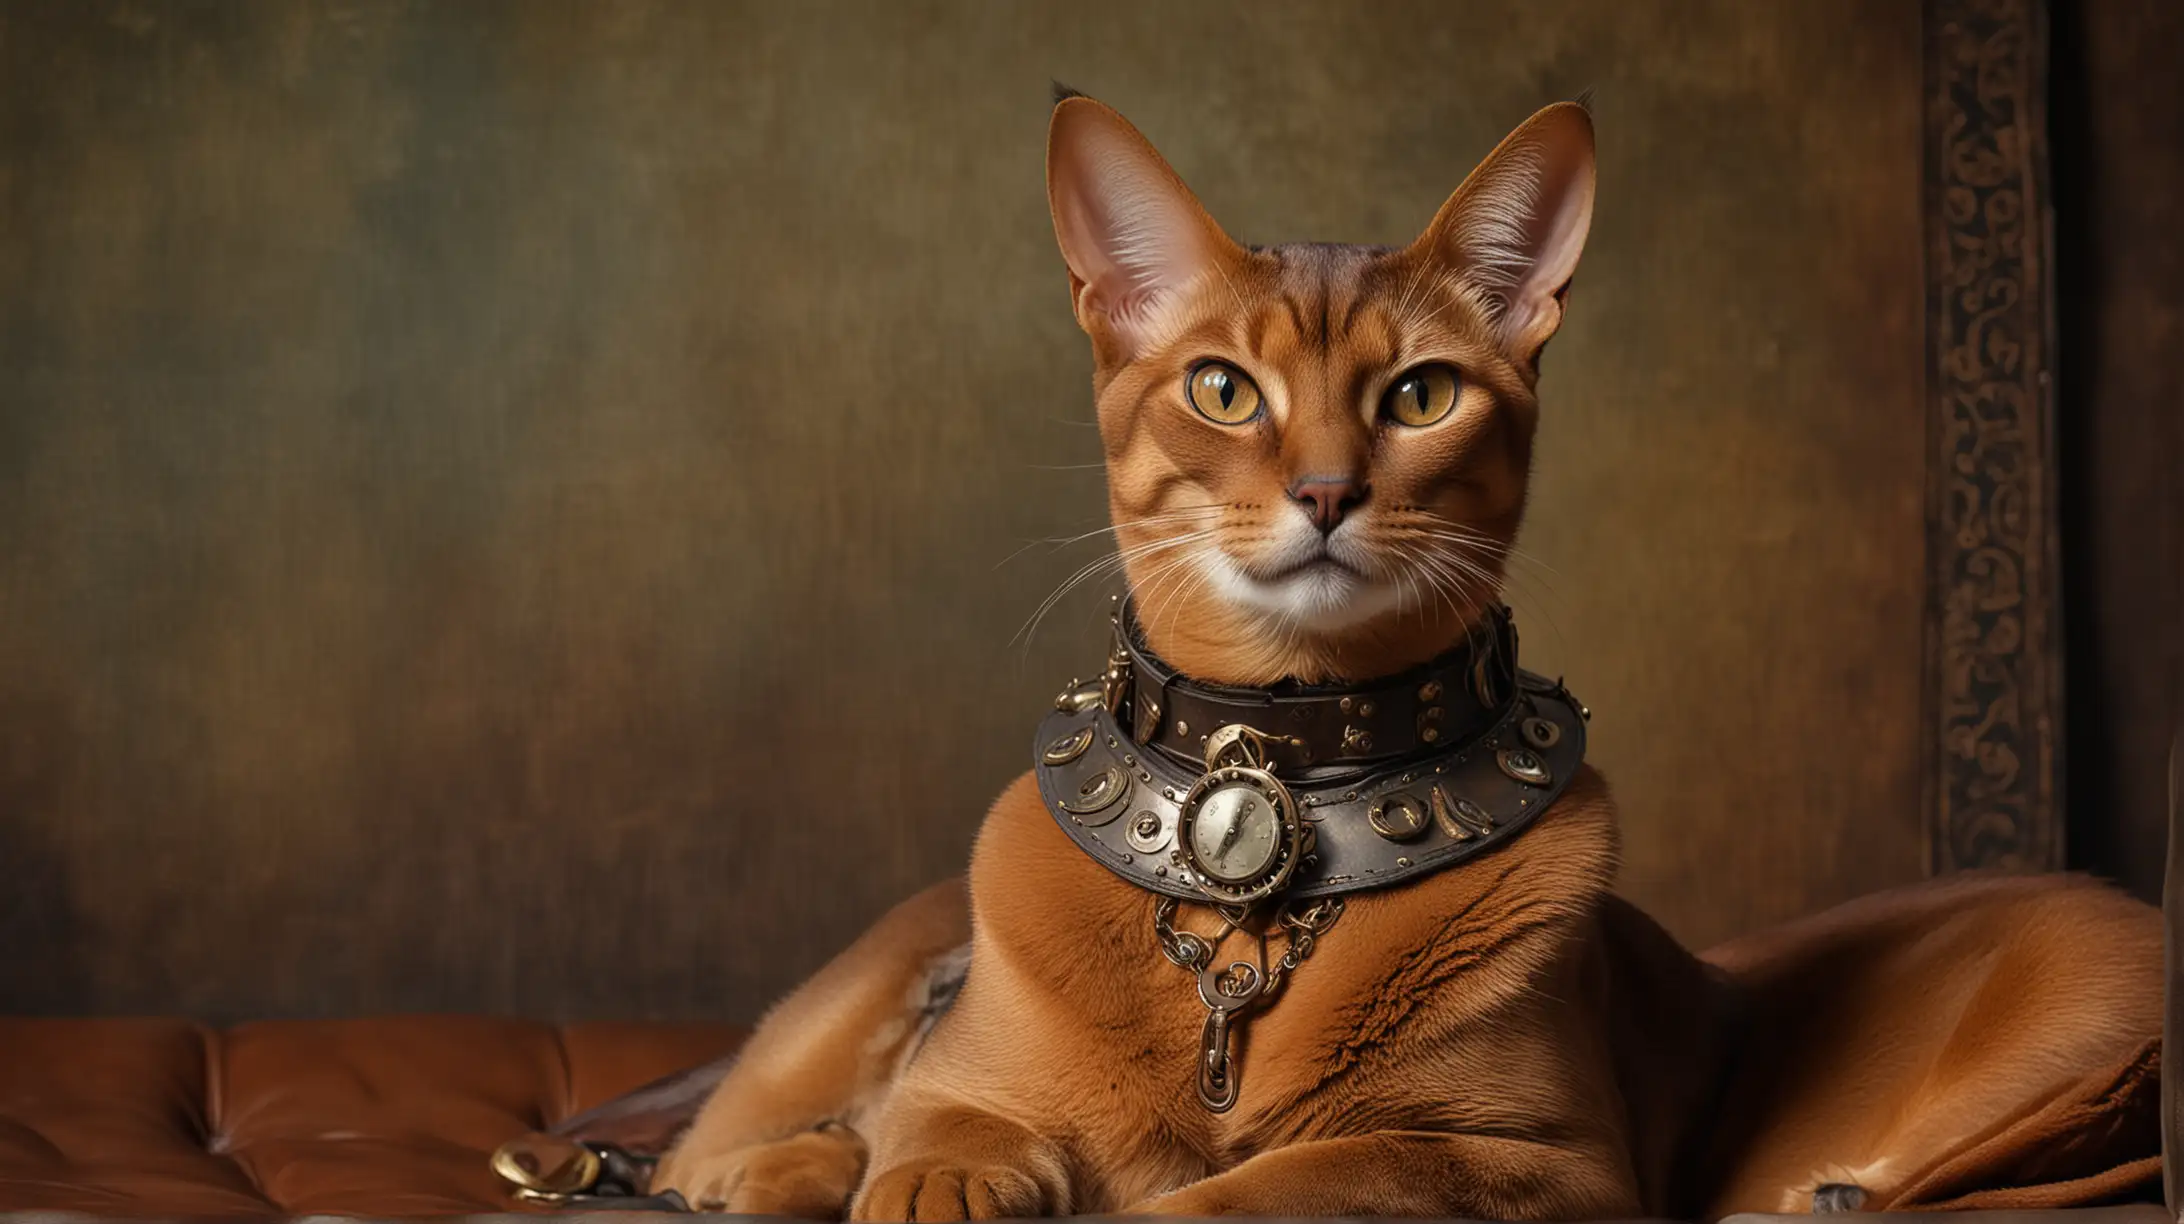 Abyssinian Cat with Steampunk Collar on Leather Sofa in Old Dutch Painting Style